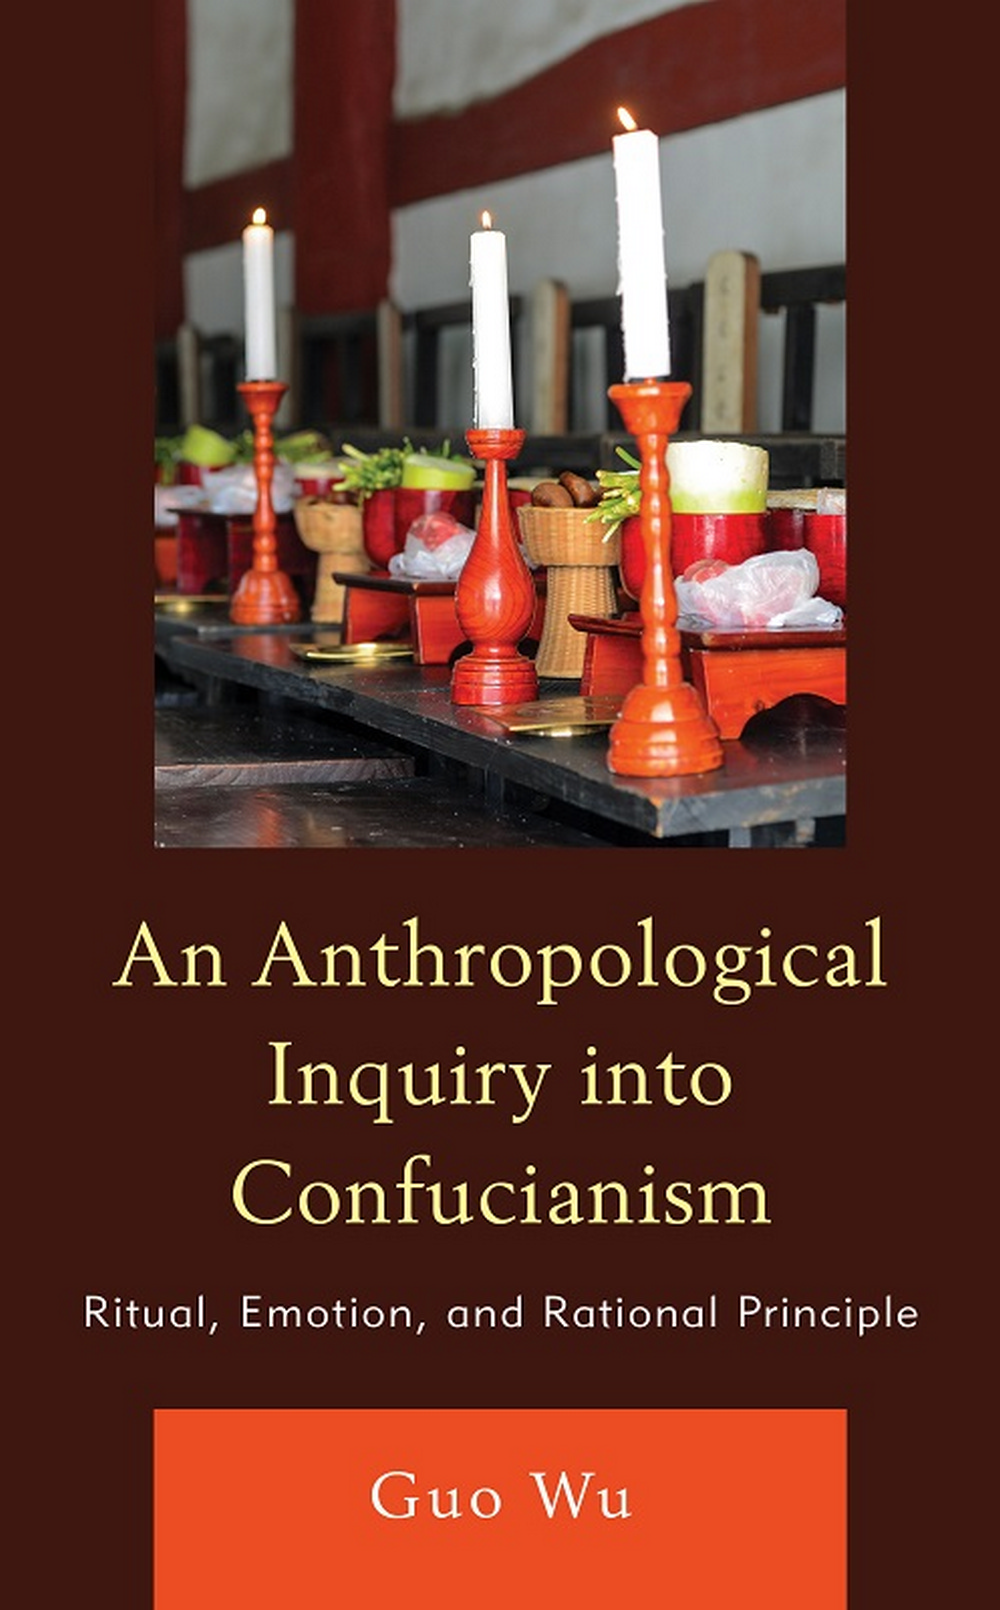 An Anthropological Inquiry into Confucianism: Ritual, Emotion, and Rational Principle